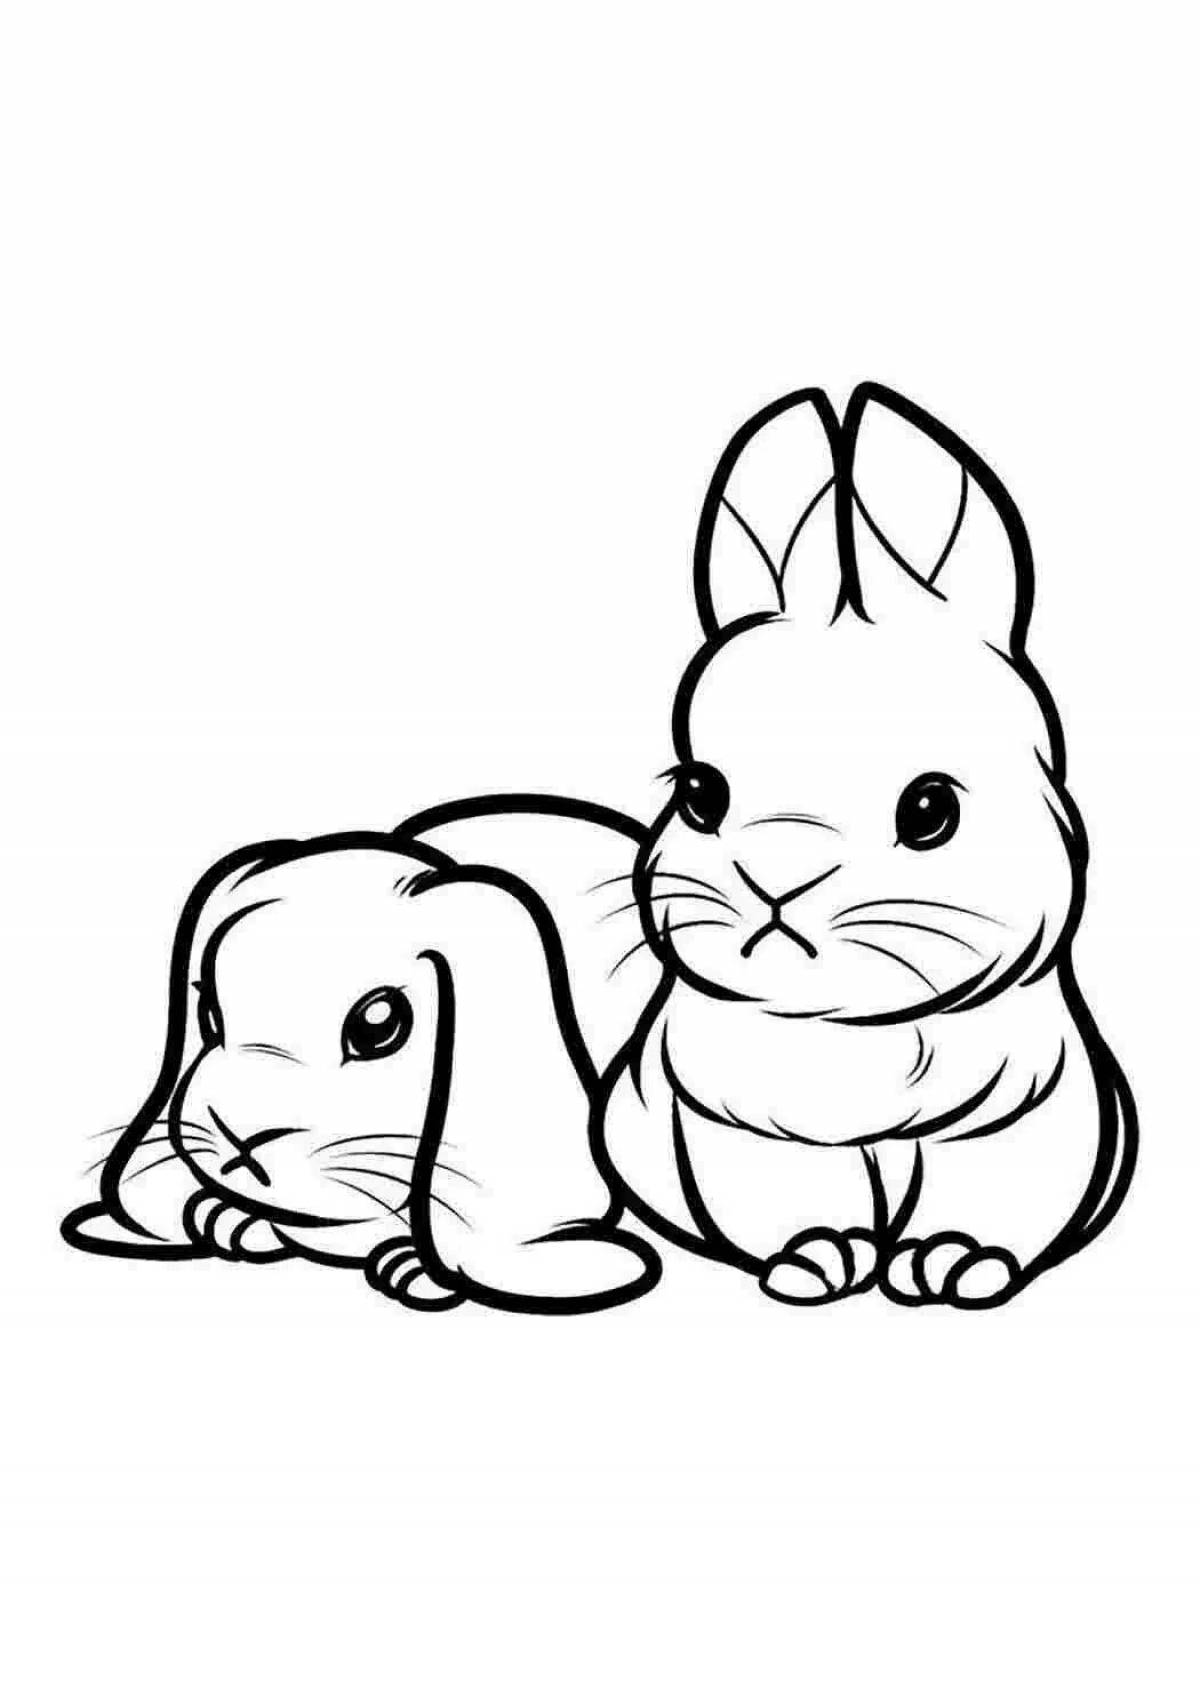 Coloring page funny cat and hare